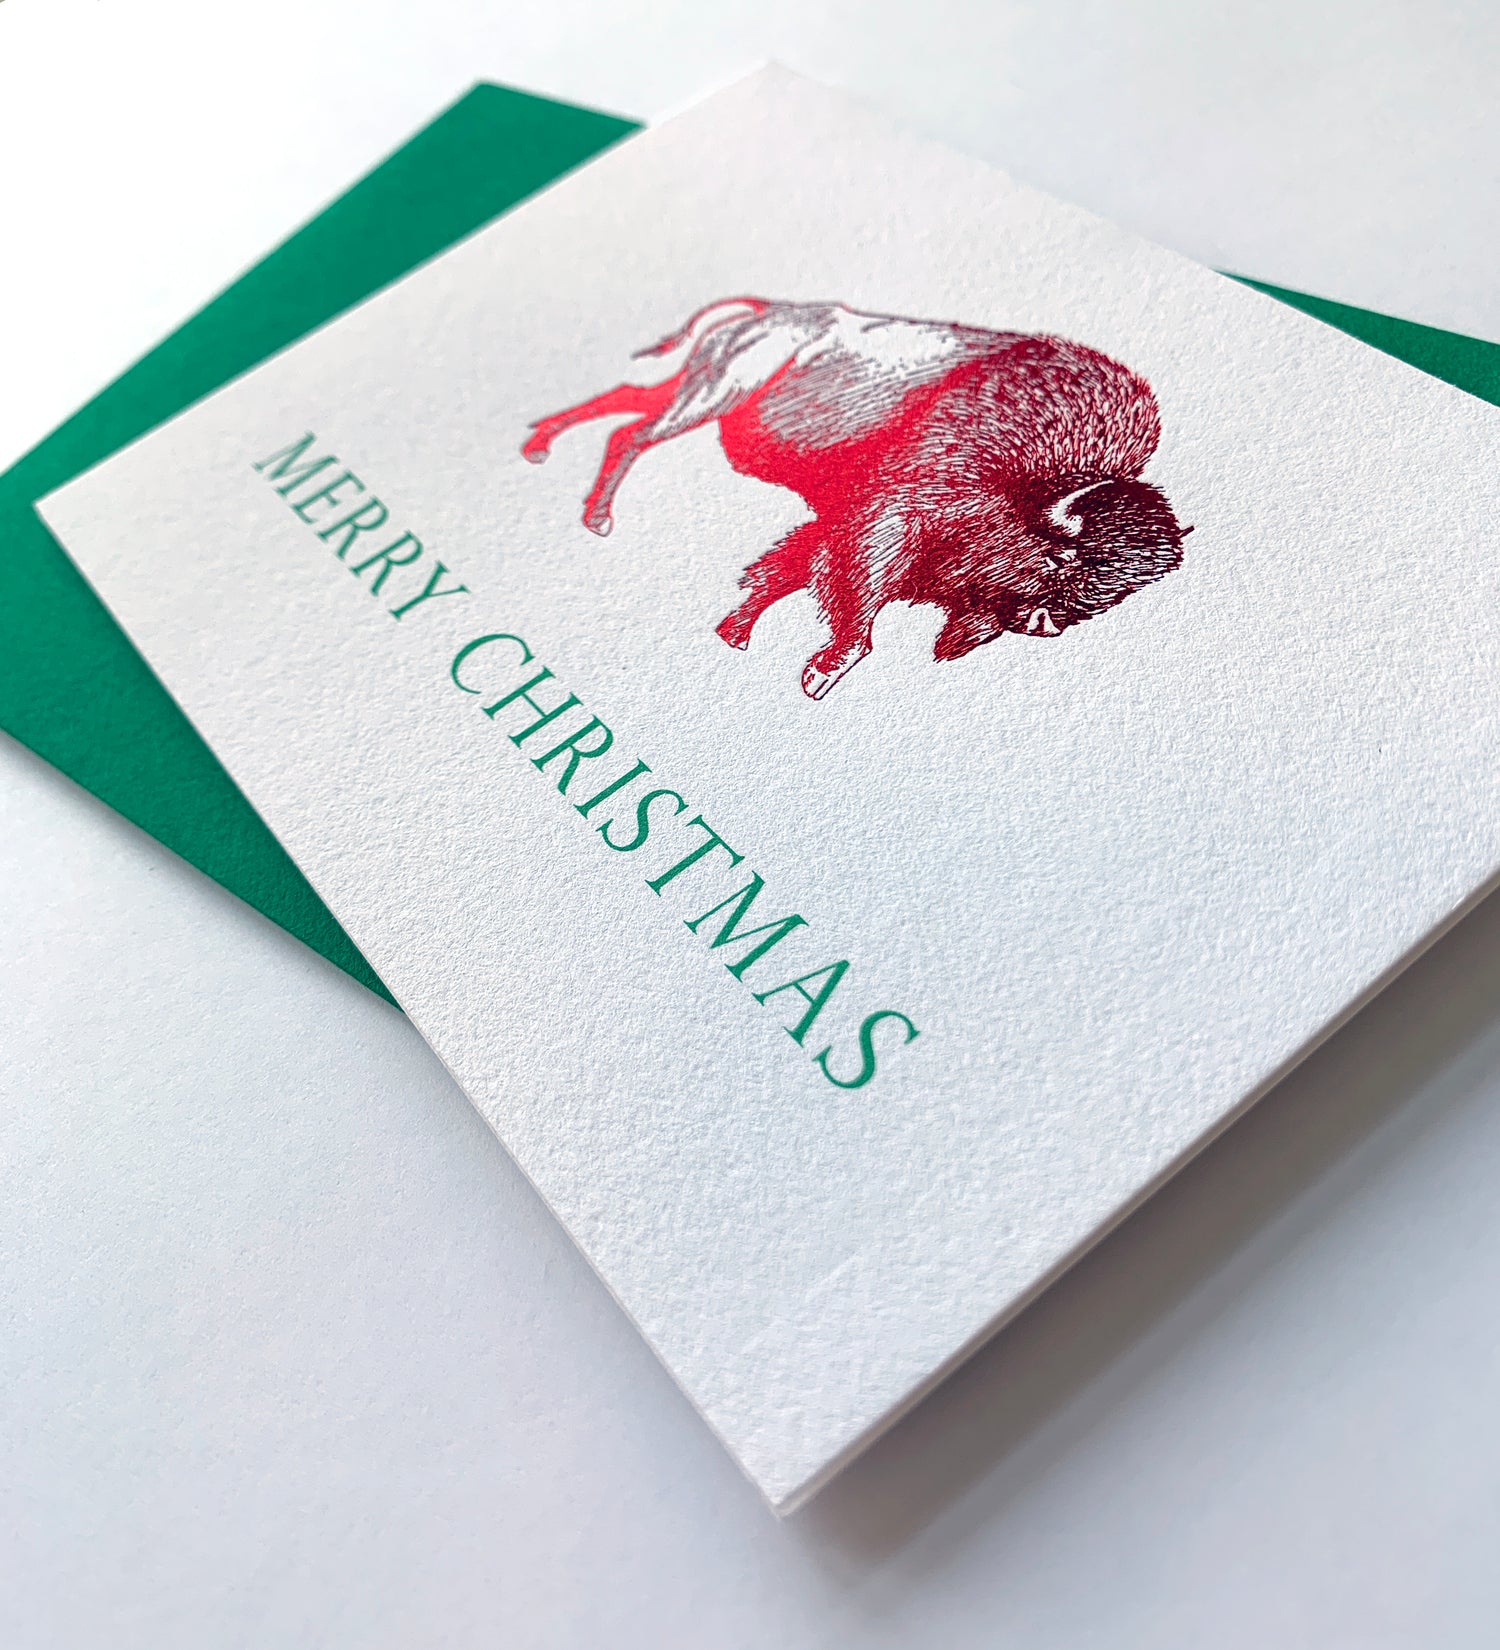 Letterpress holiday card with red foil buffalo that says "Merry Christmas" by Rust Belt Love